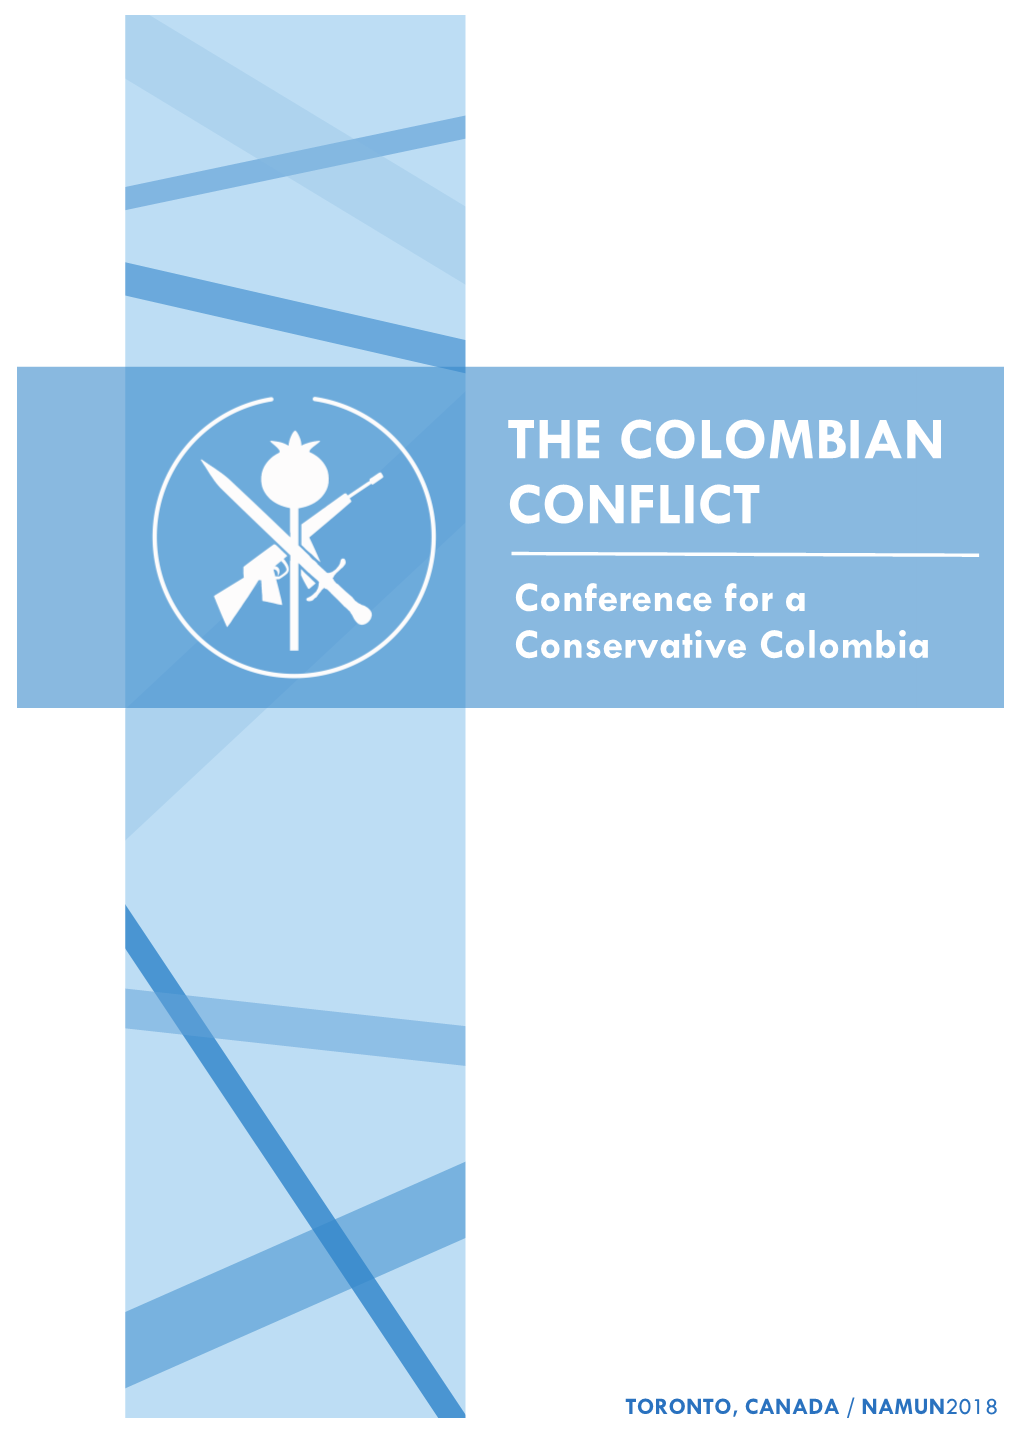 The Colombian Conflict Developed and Arose from Political Power Struggles and a Burgeoning Identity Crisis